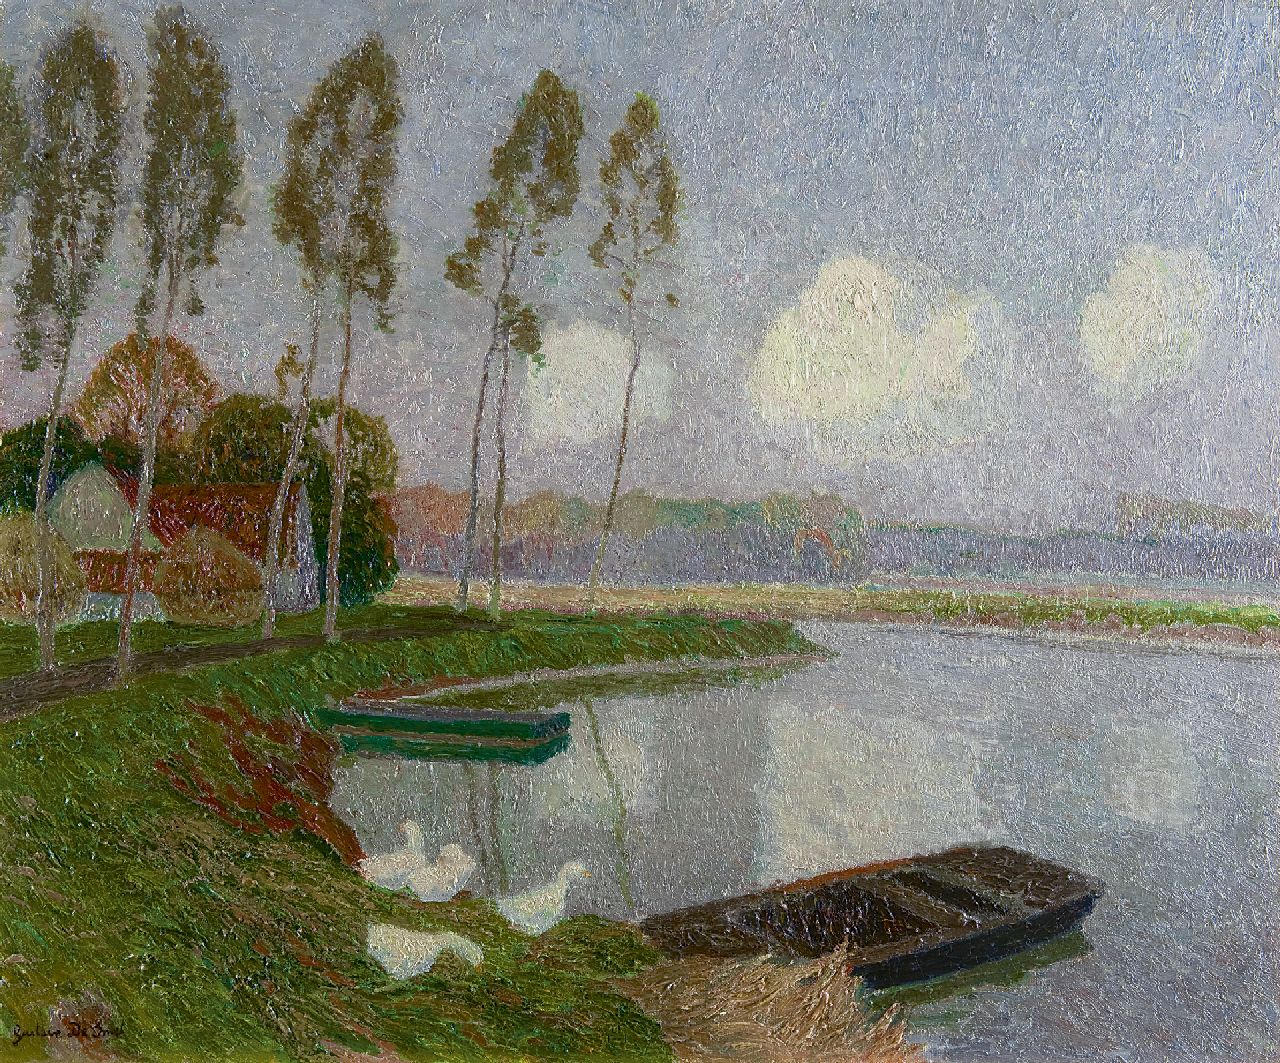 Smet G. de | Gustave de Smet, Along the river Leie, near Sint-Martens-Latem, oil on canvas 50.5 x 60.9 cm, signed l.l. and executed ca. 1913-1914